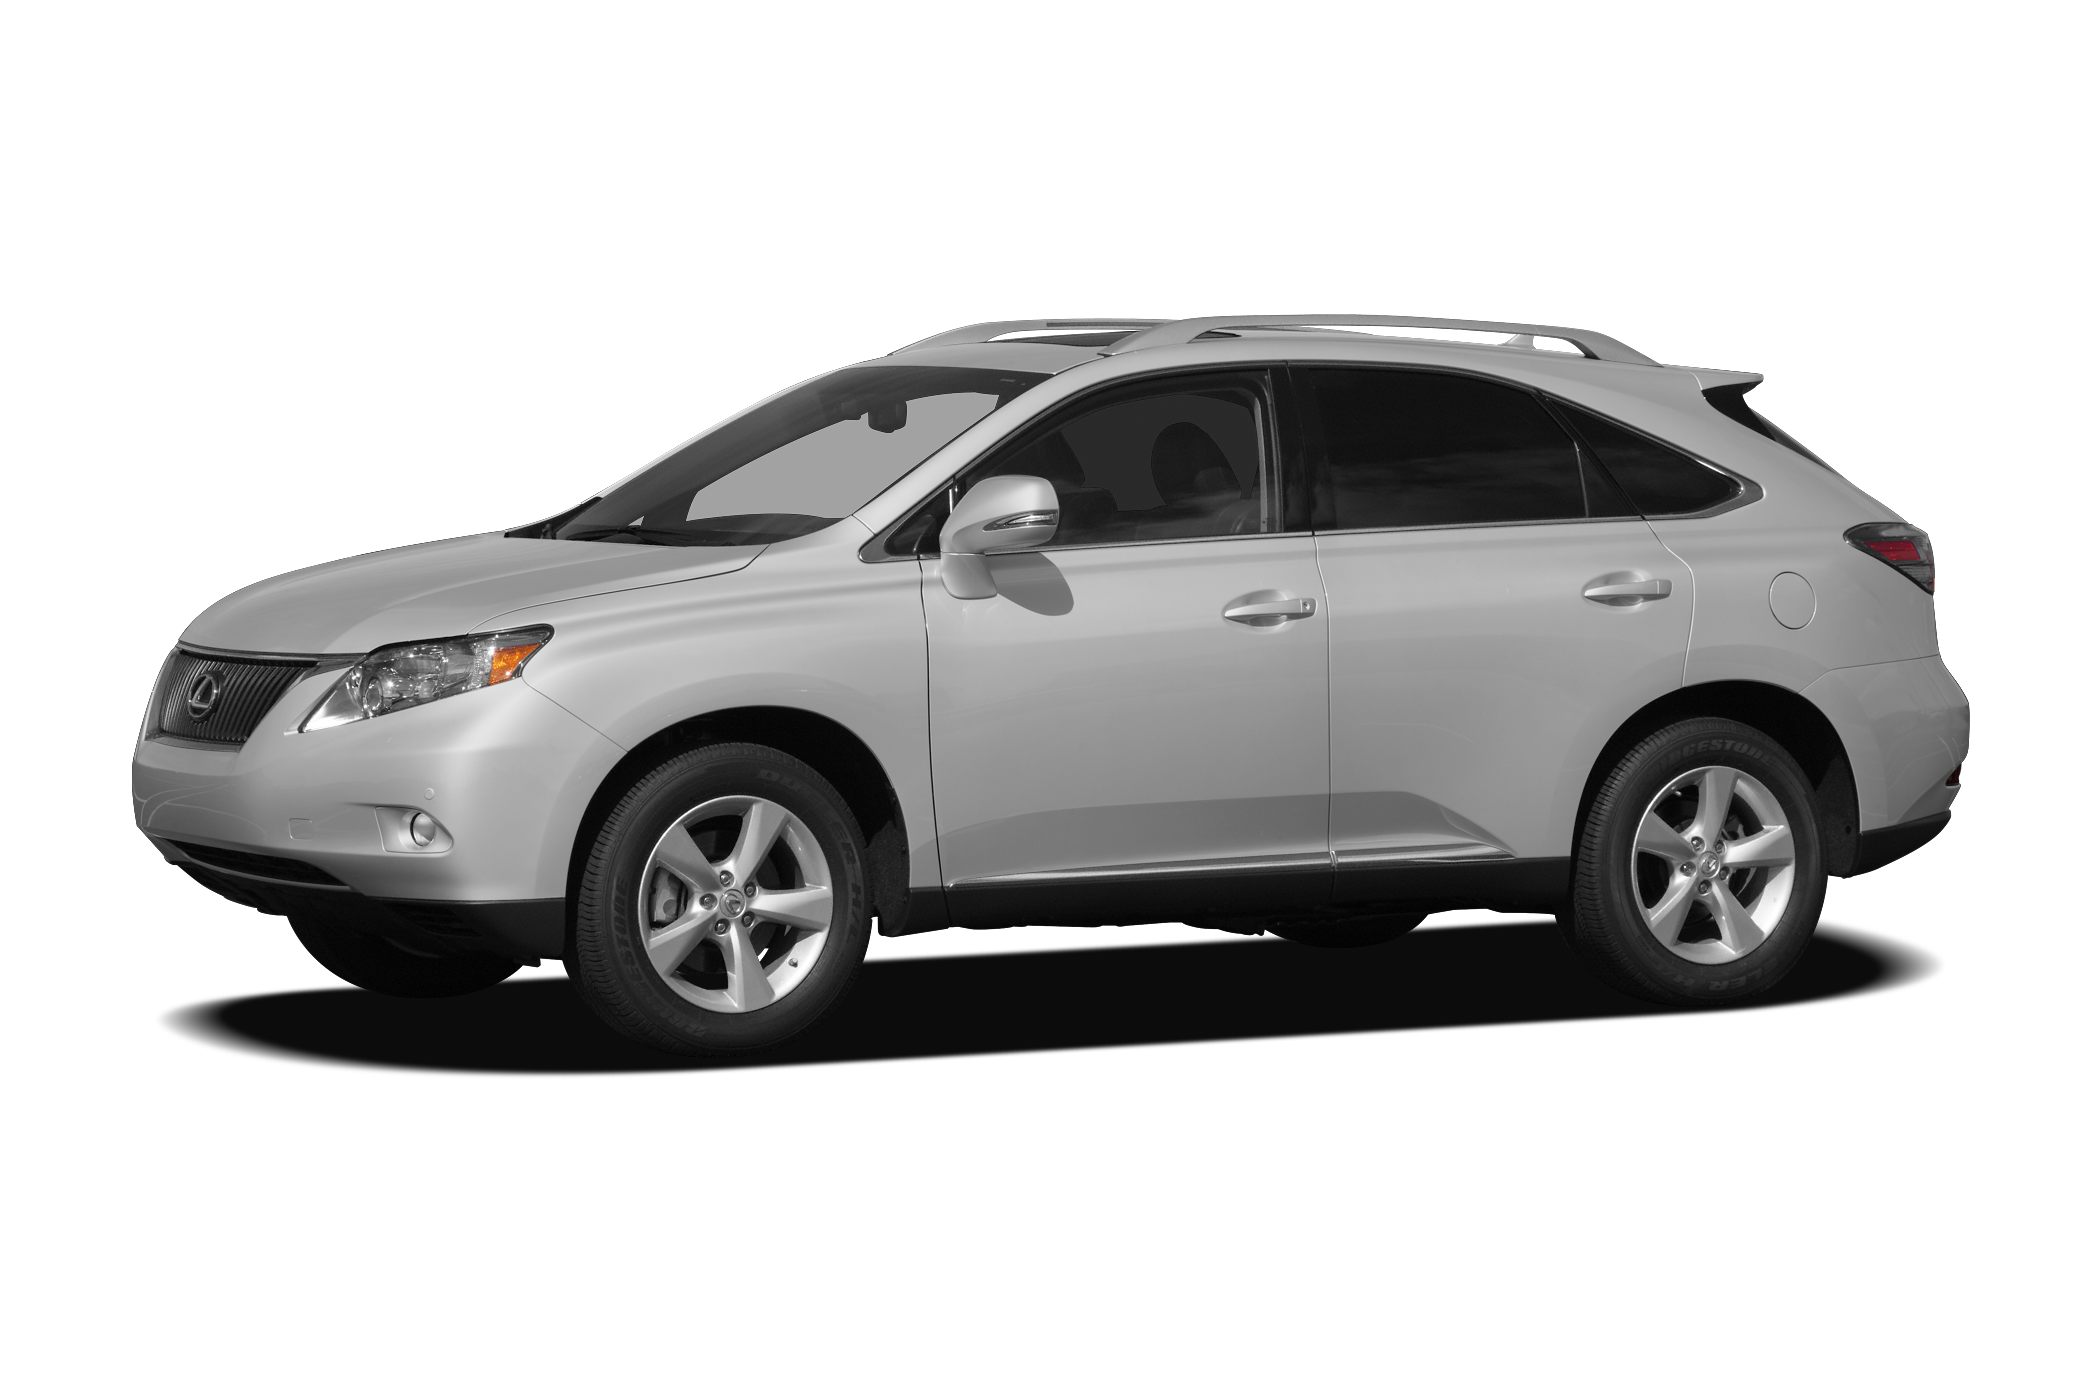 2010 Lexus Rx 350 Owner Reviews And Ratings